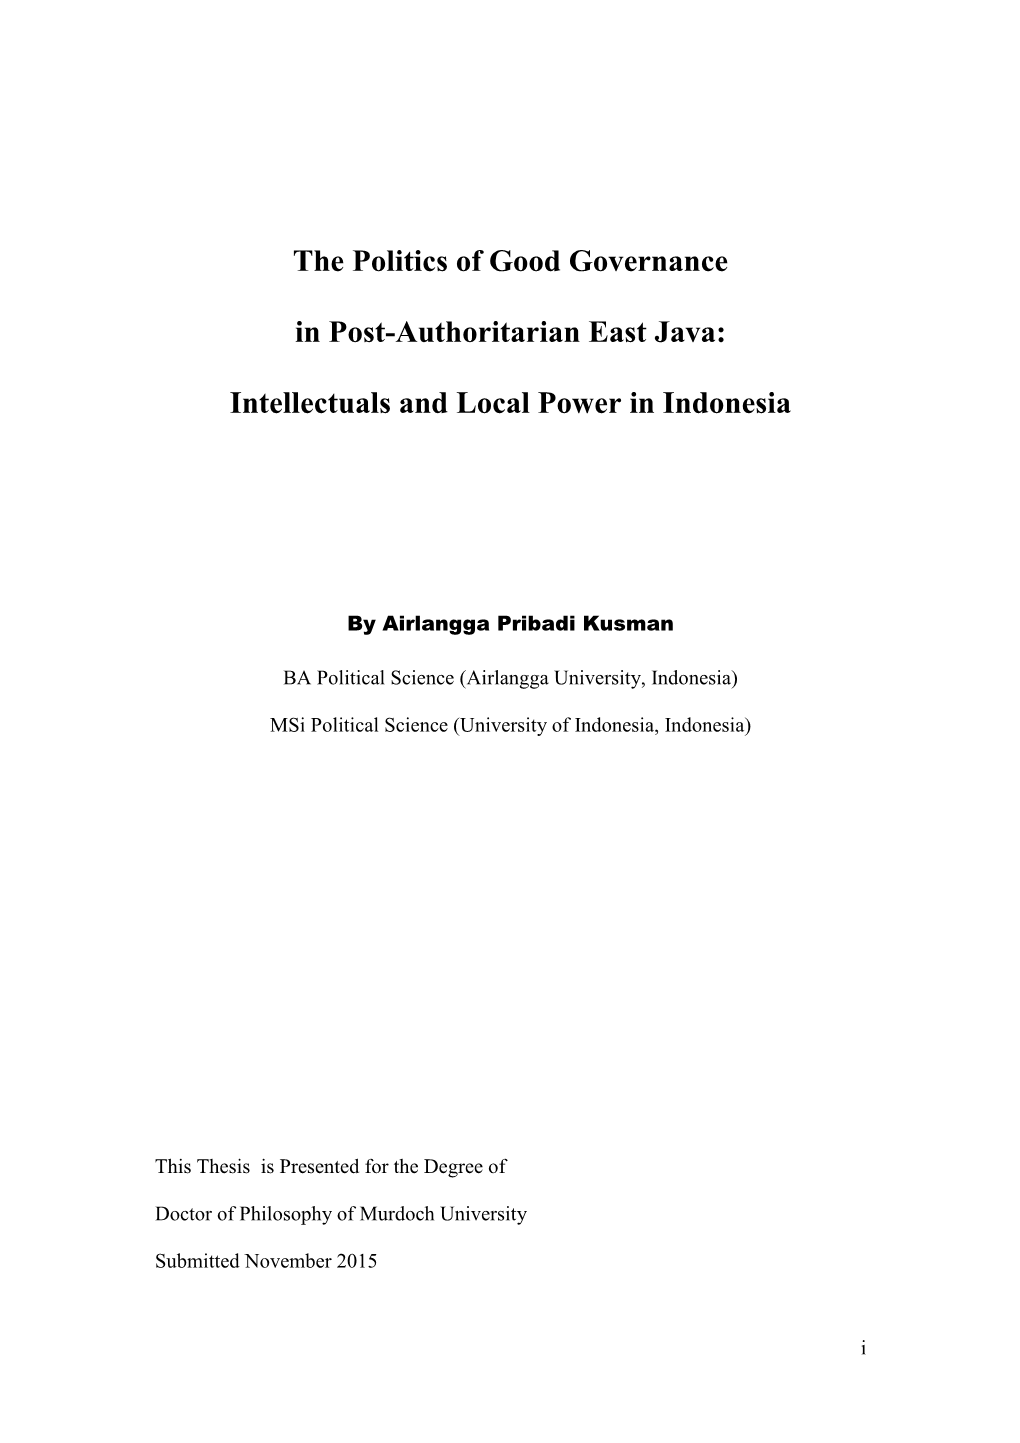 The Politics of Good Governance in Post-Authoritarian East Java